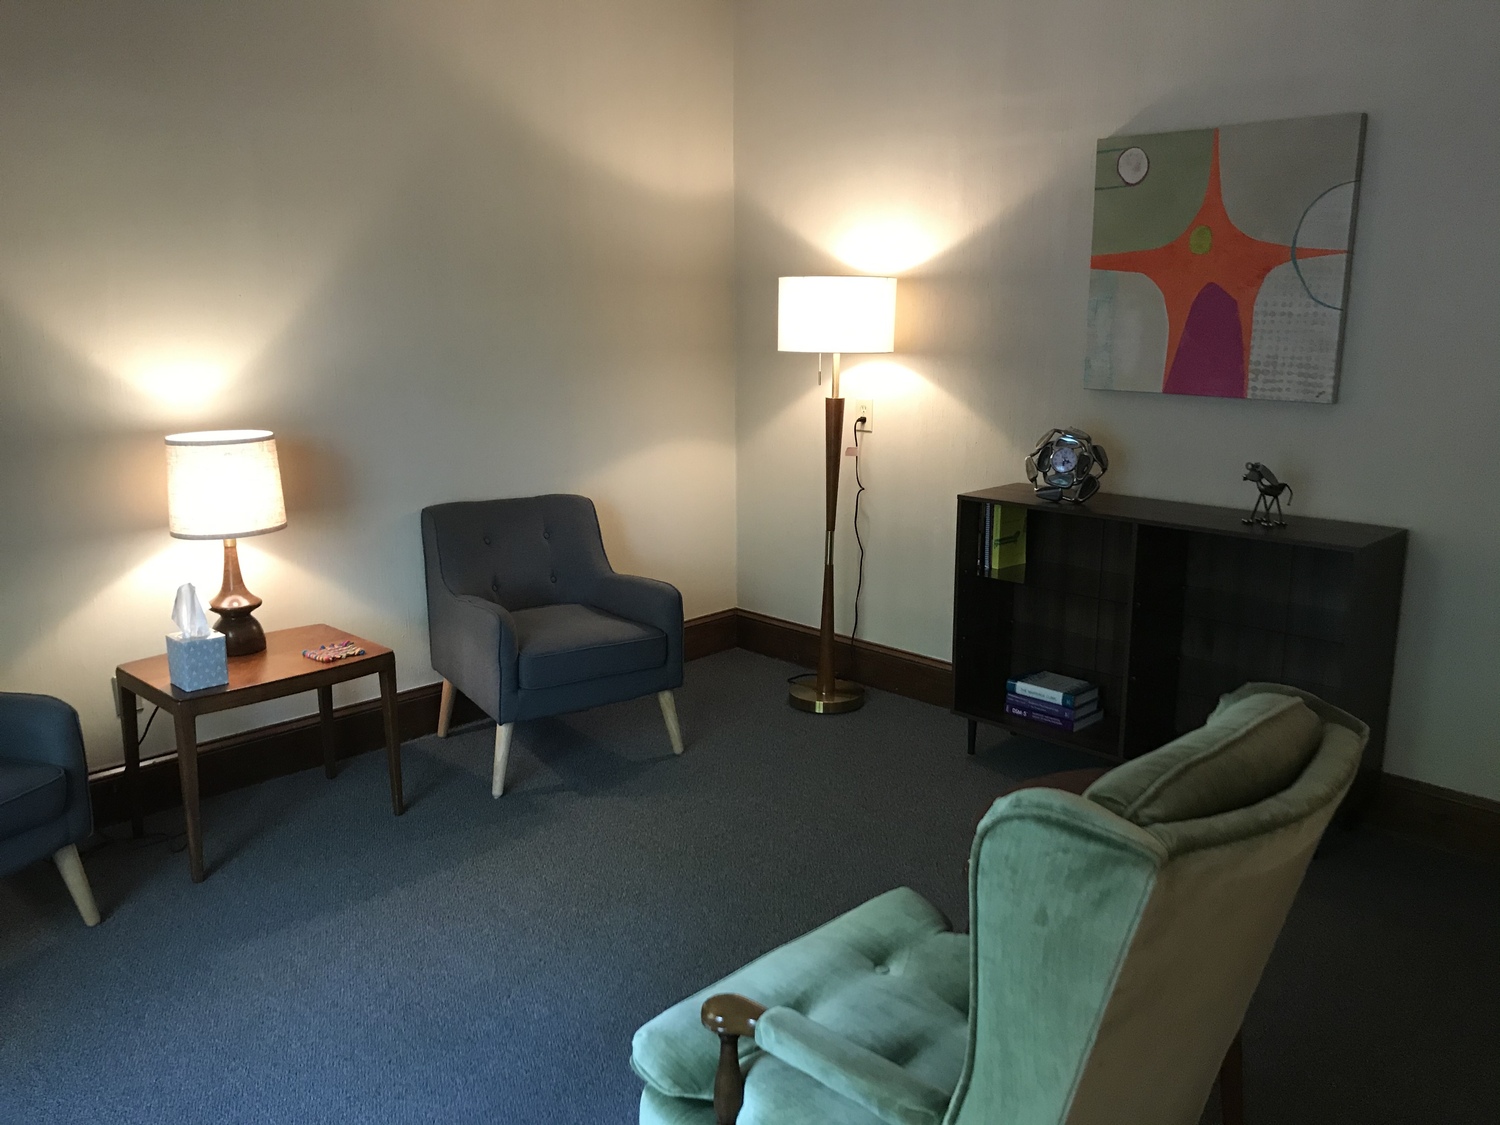 Gallery Photo of Counseling Room